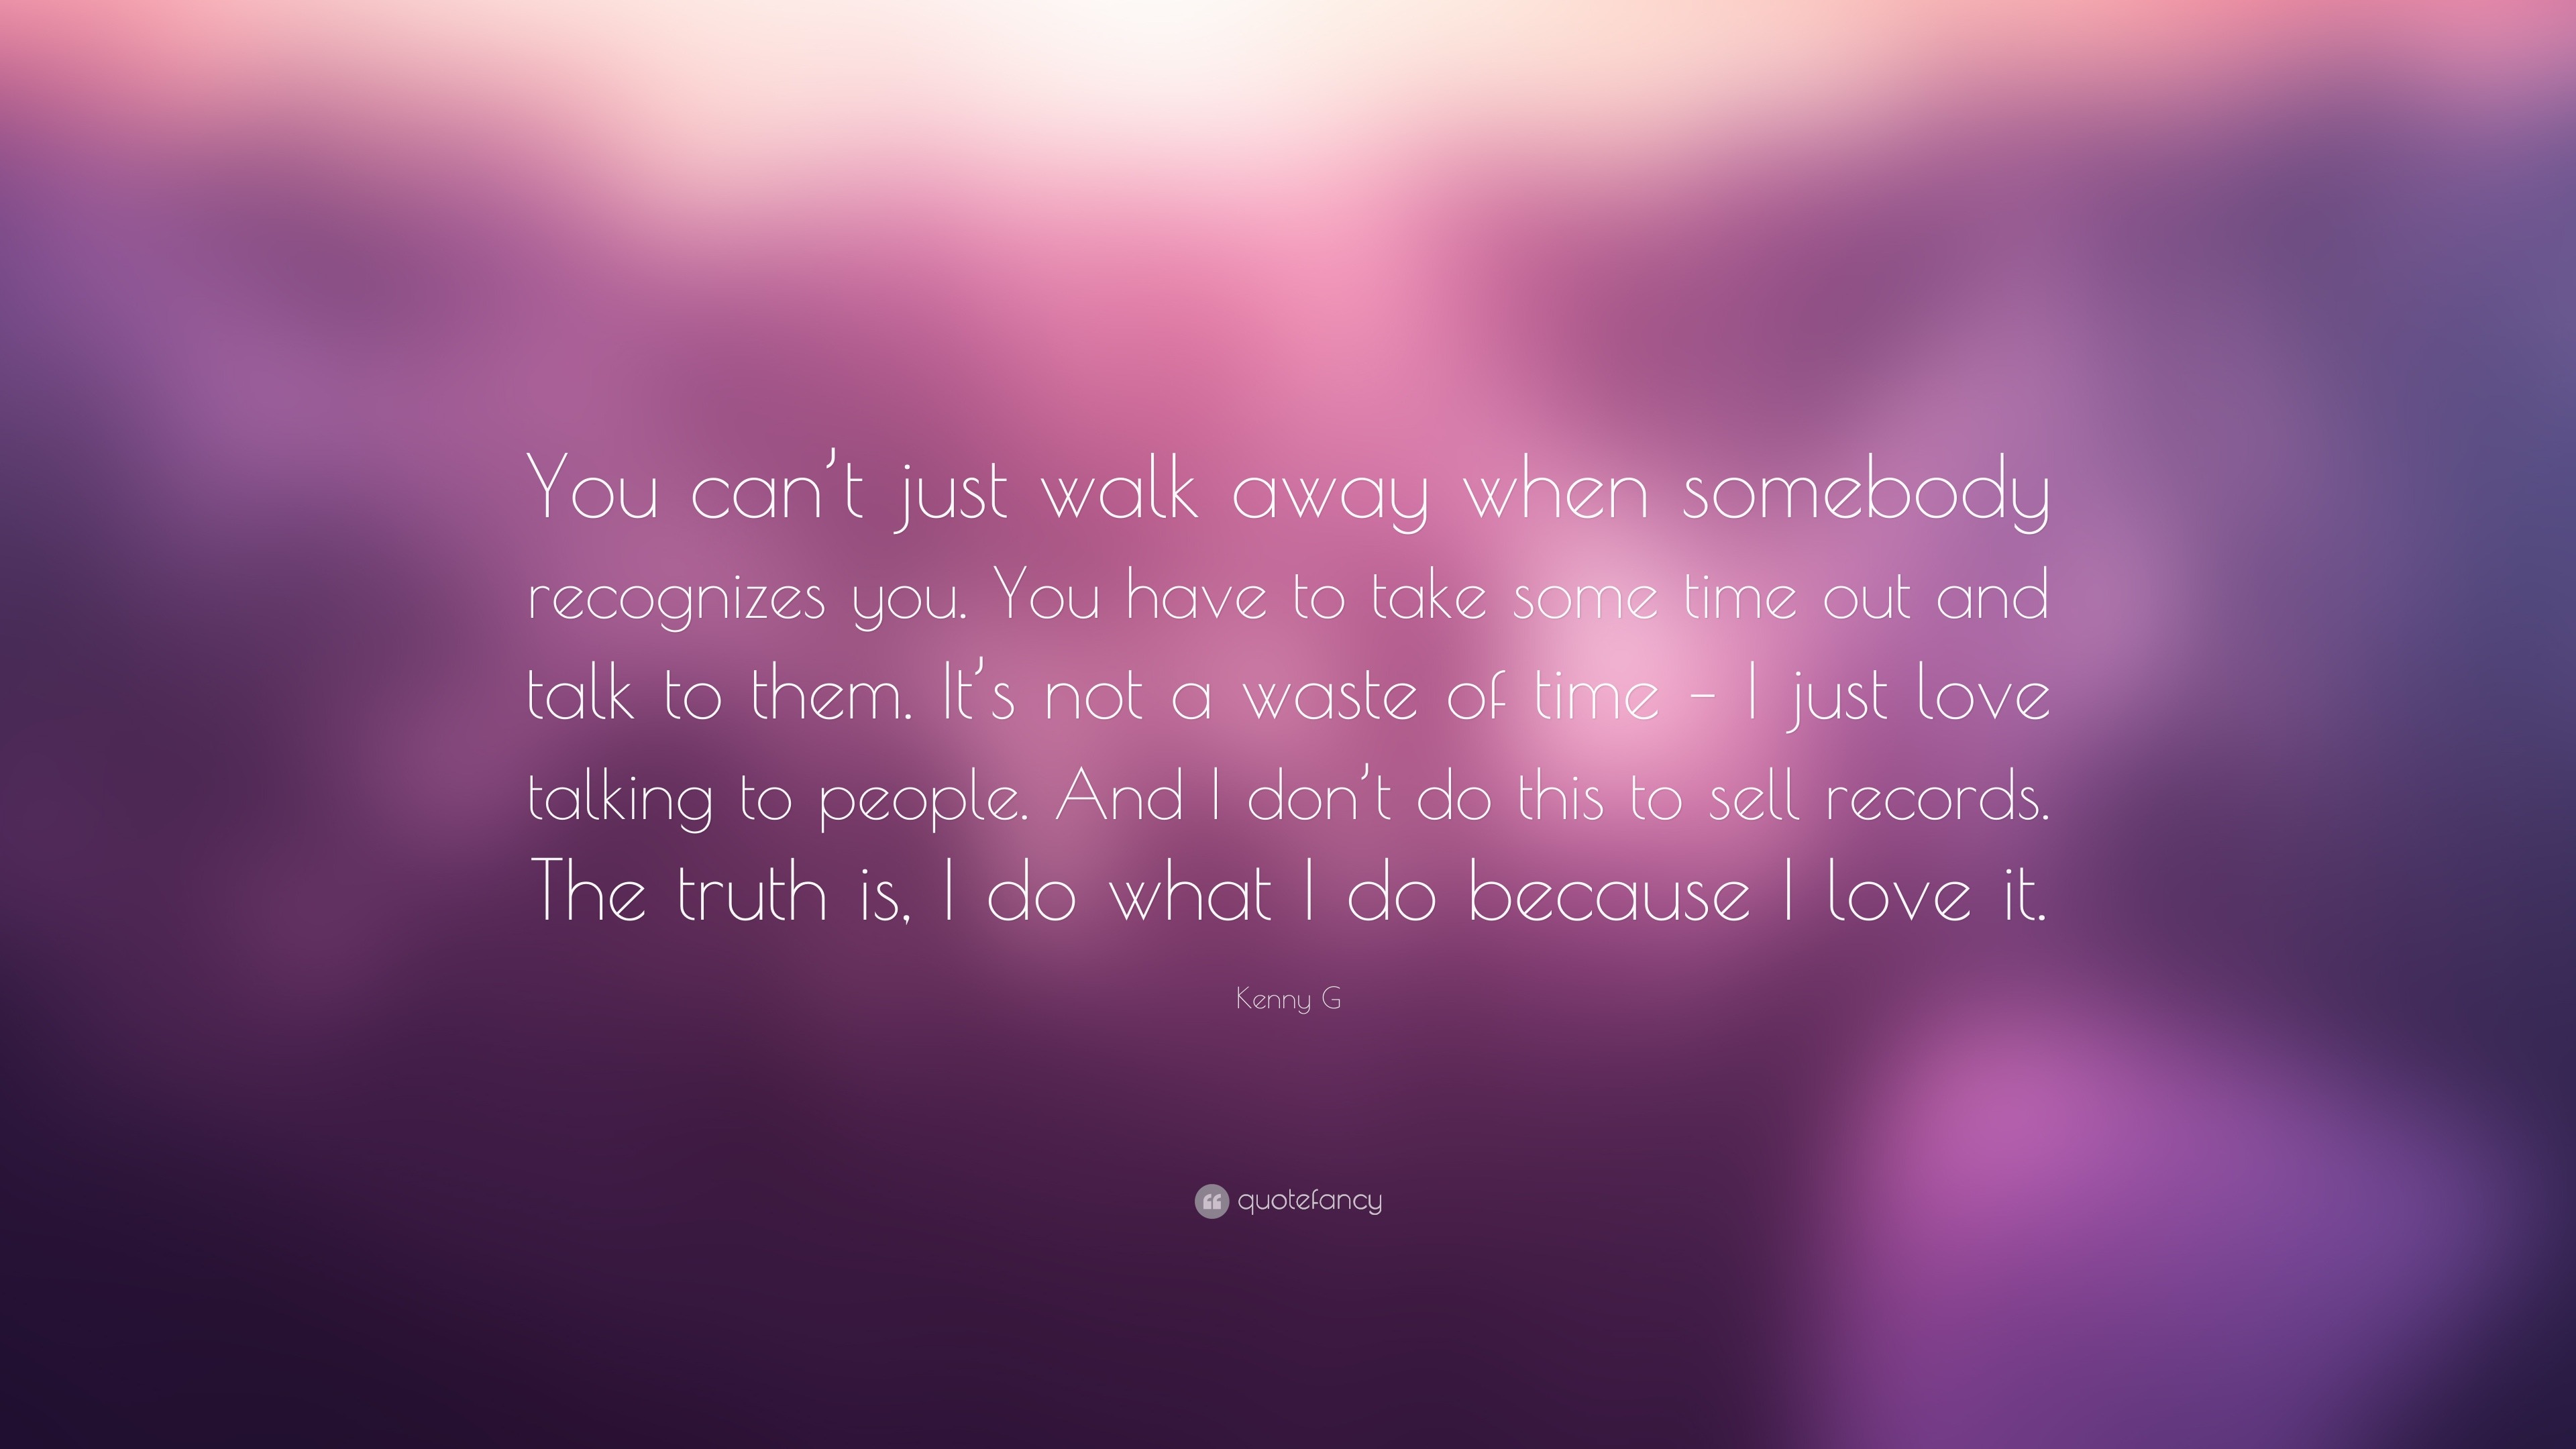 Kenny G Quote: “You can’t just walk away when somebody recognizes you ...